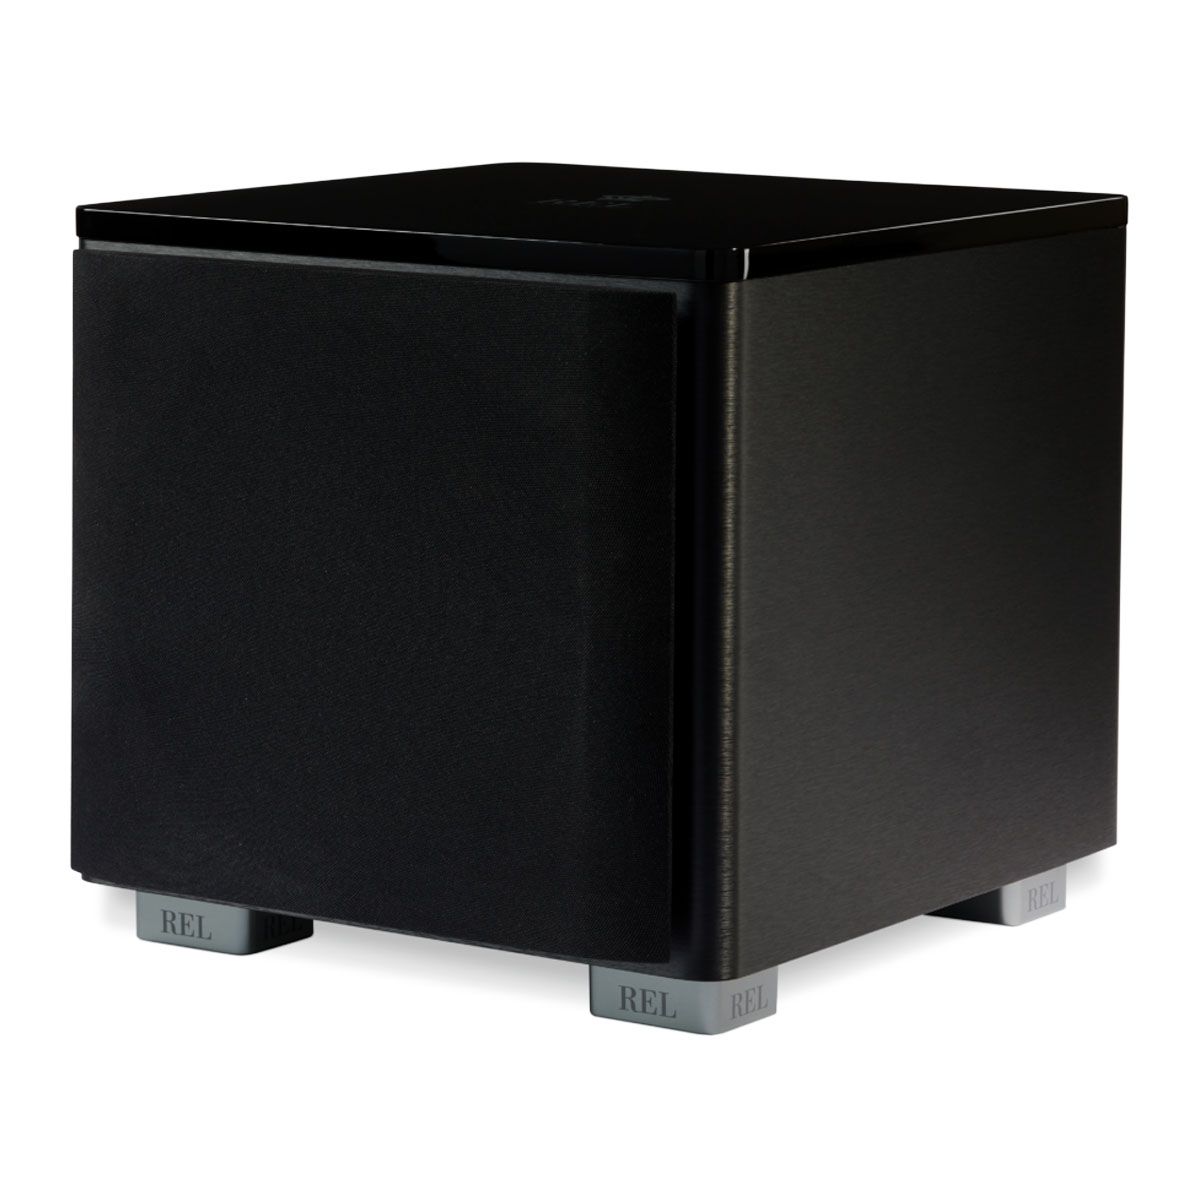 REL Acoustics HT/1205 MKII Subwoofer - angled front view with grille